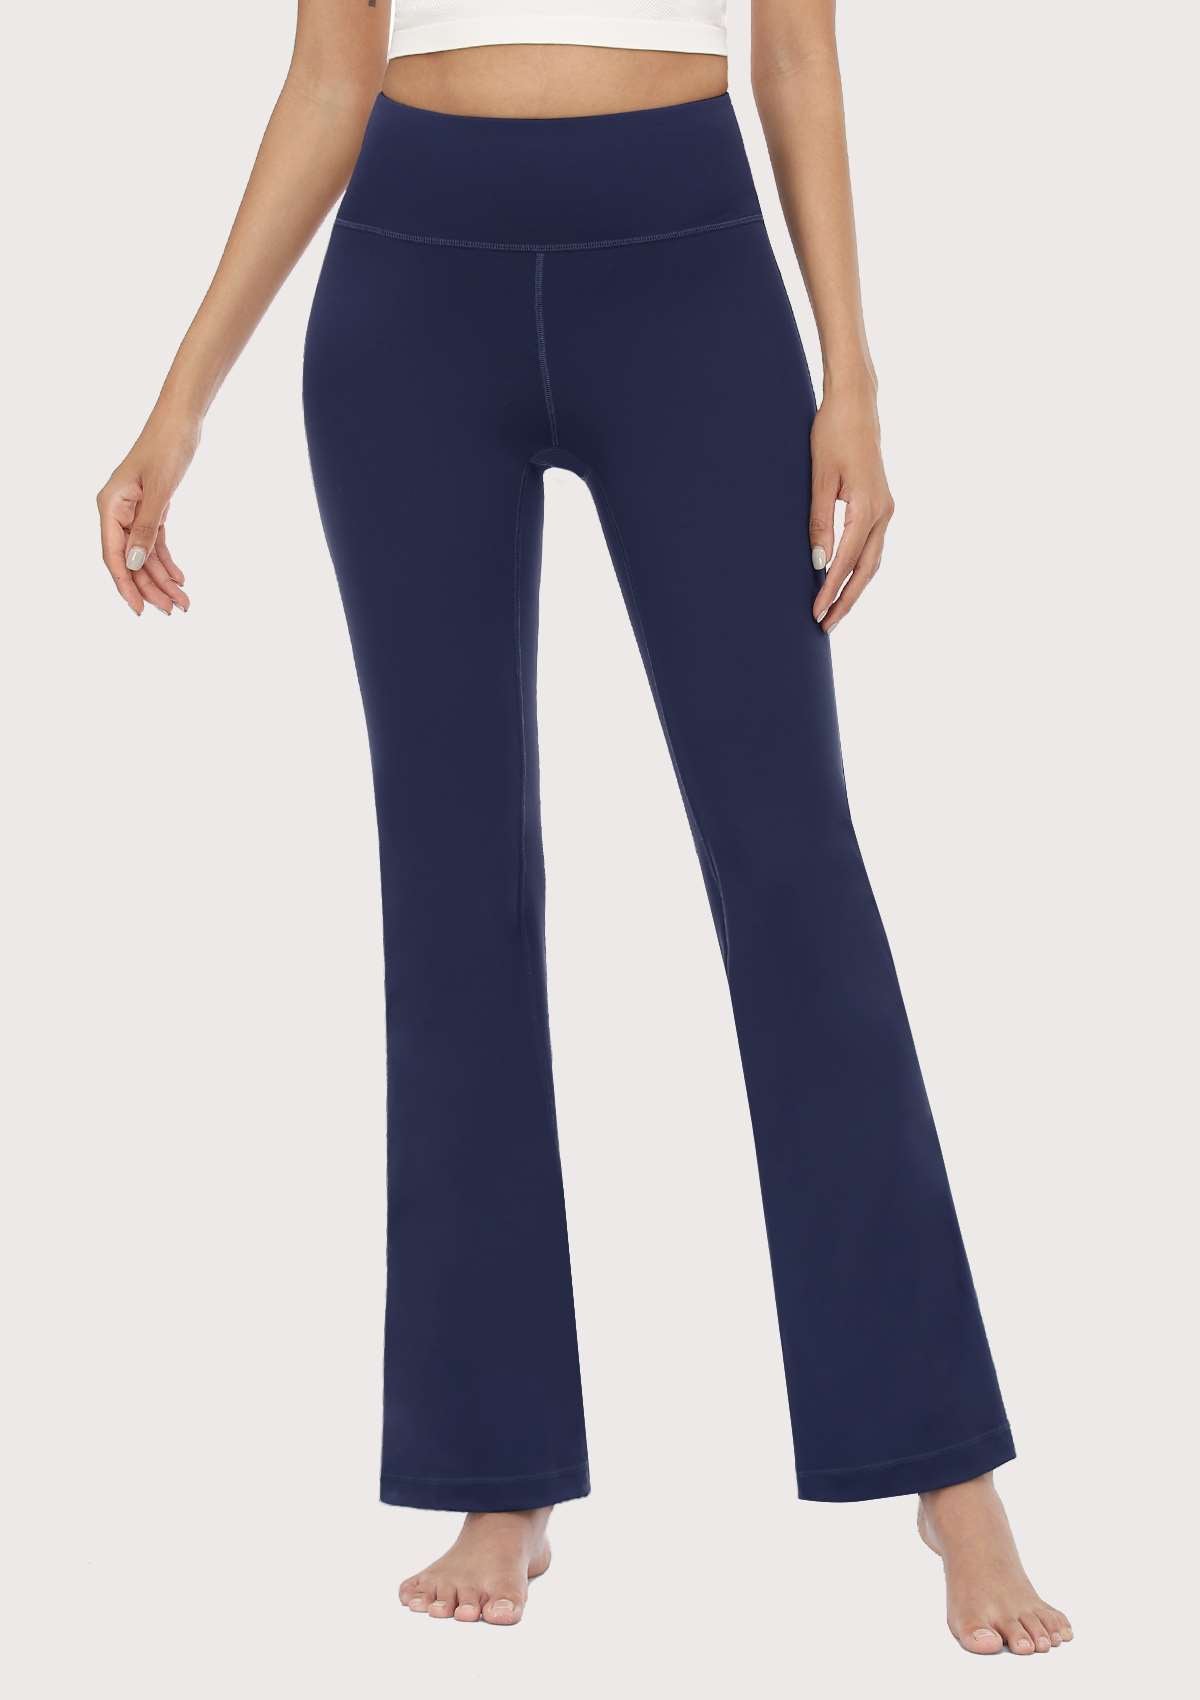 SONGFUL Smooth High Waisted Bootcut Yoga Sports Pants - L / Dark Blue